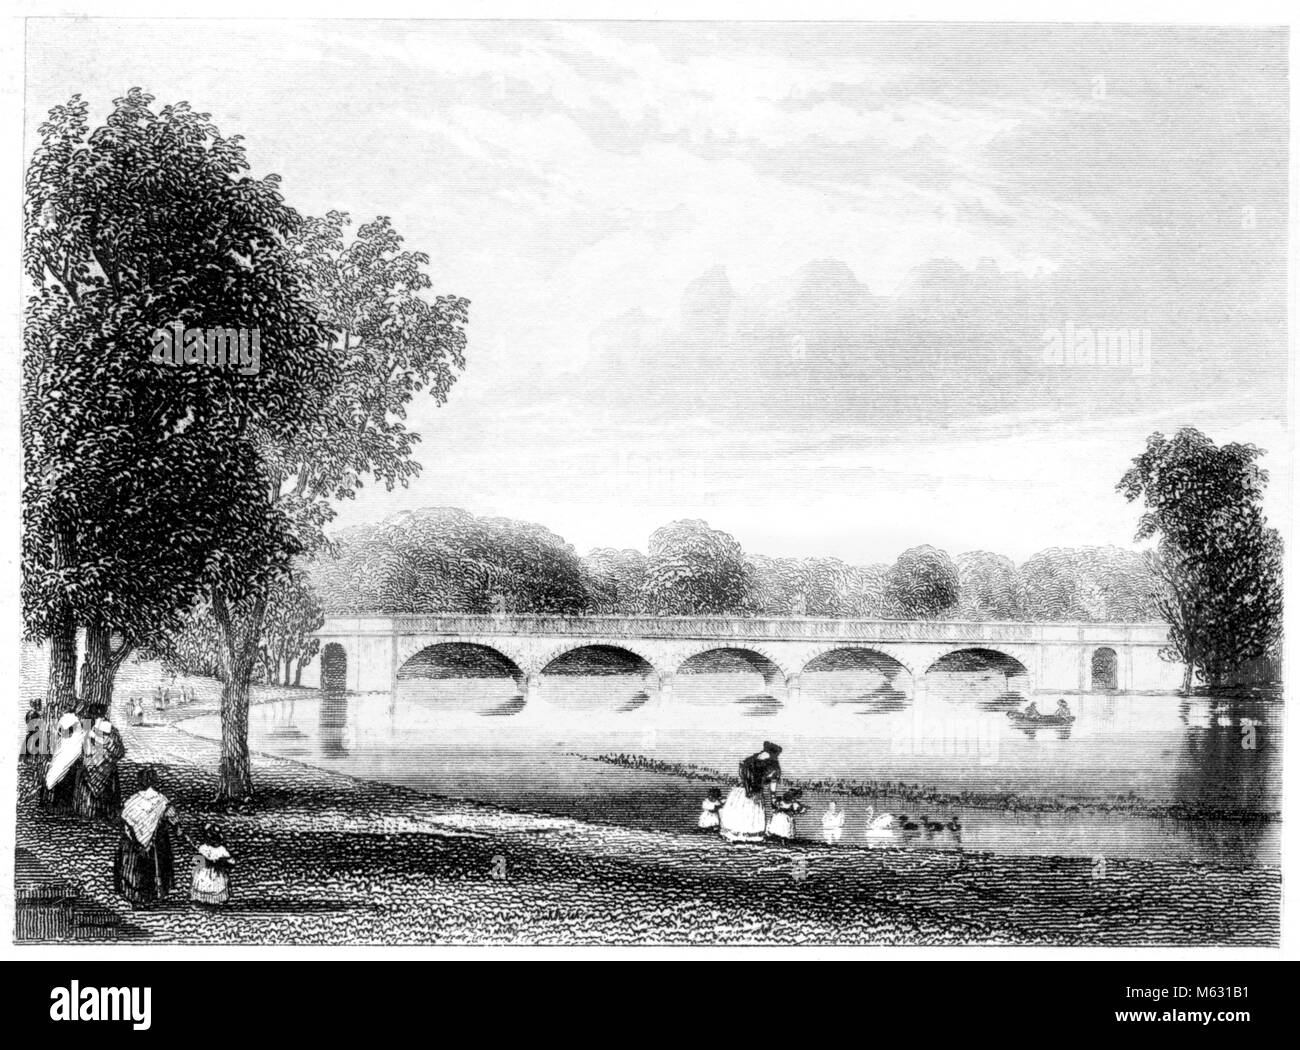 An engraving of a Bridge over the Serpentine, London scanned at high resolution from a book printed in 1851. Believed copyright free. Stock Photo